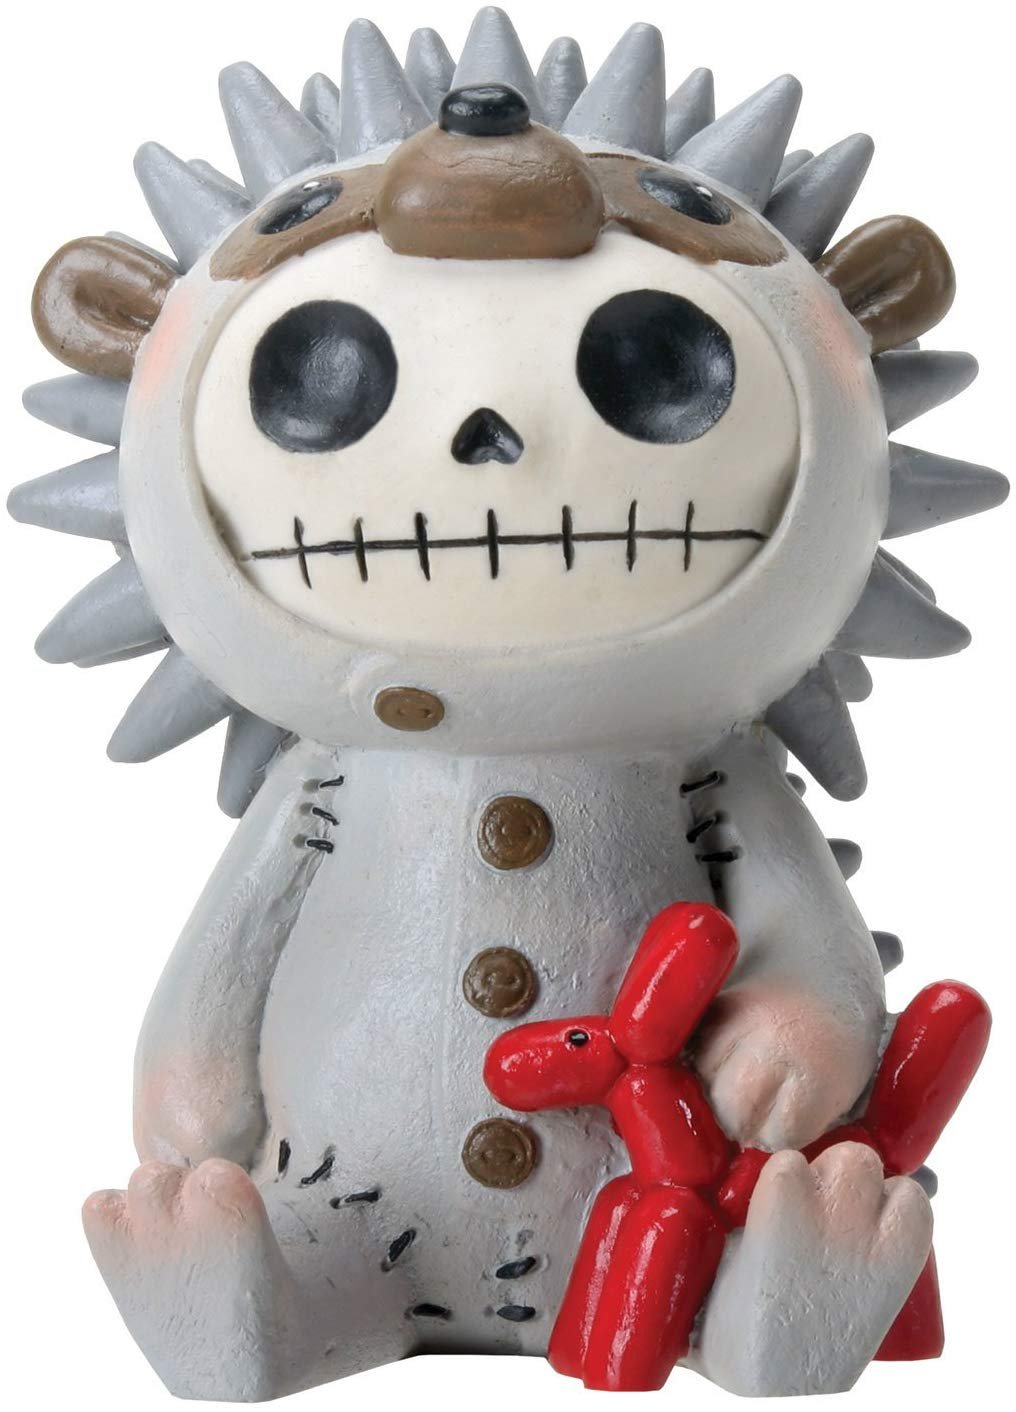 SUMMIT COLLECTION Furrybones Hedrick Signature Skeleton in Hedgehog Costume with Red Balloon Animal